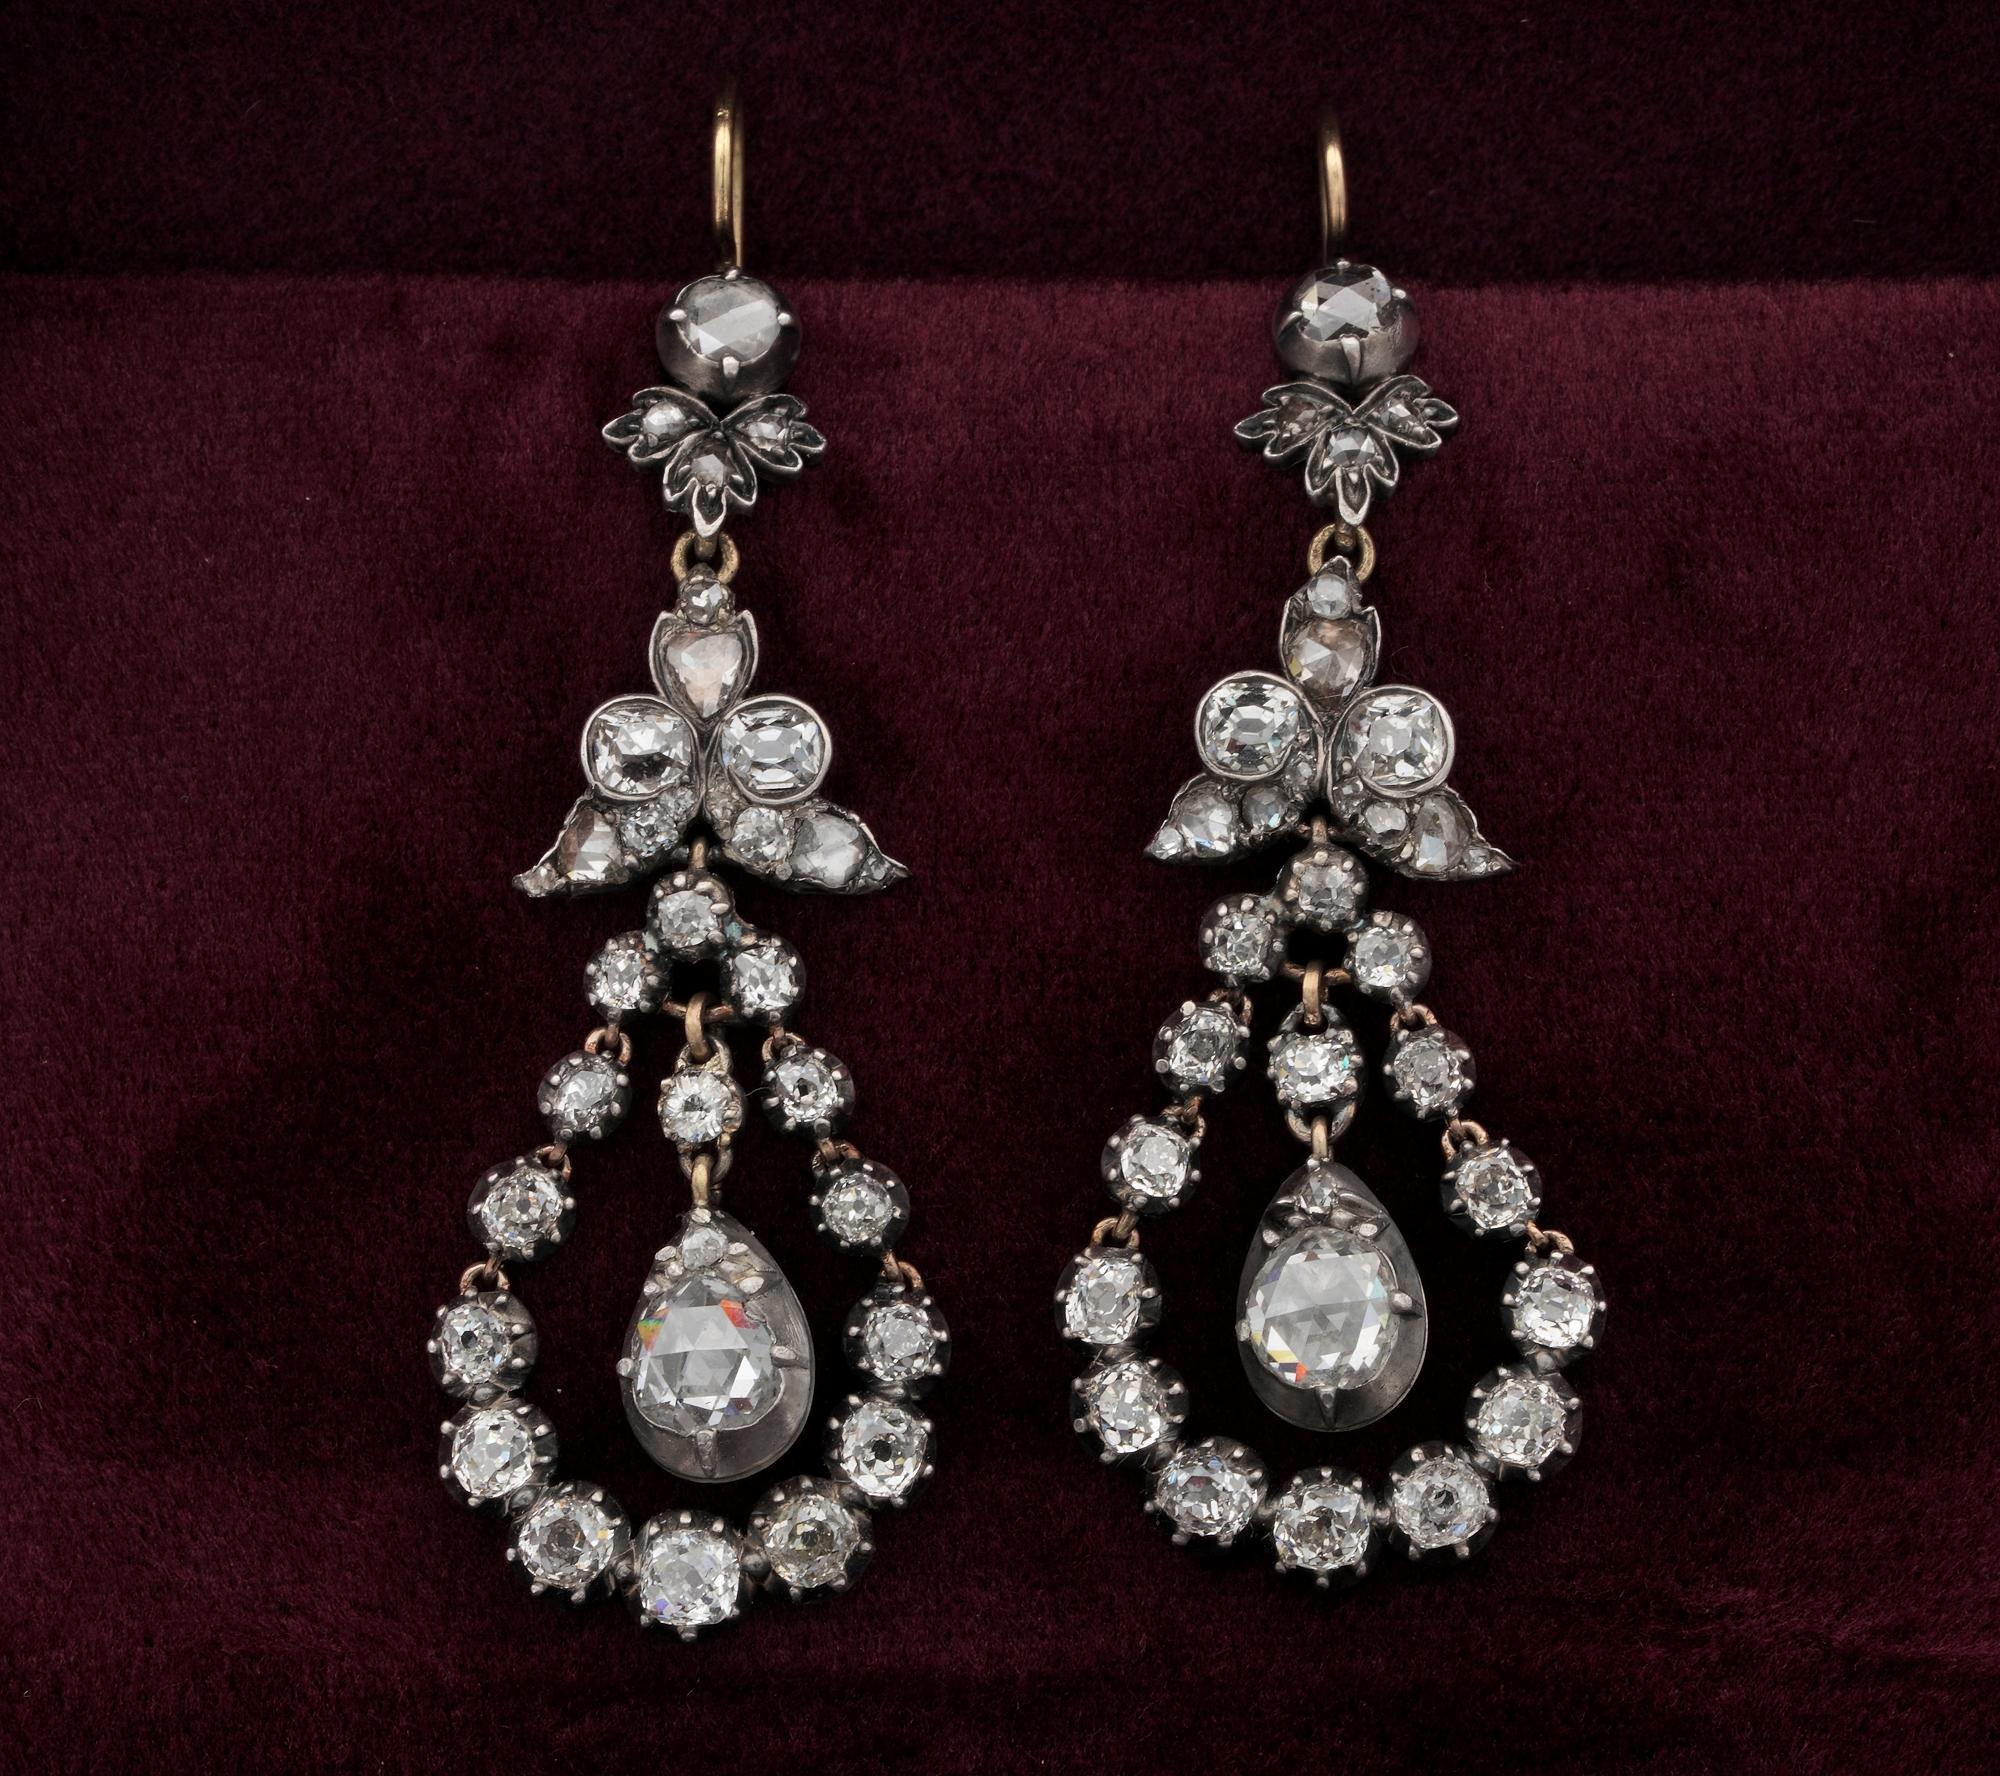 A piece of eternity
Enchanting pair of Georgian period Diamond chandelier earrings
Rare in beauty, timeless treasure
Set throughout by a selection of rose cut and old mine cut Diamonds – approx 5.50 Ct in TCW -2 Dutch rose cut diamonds totalling